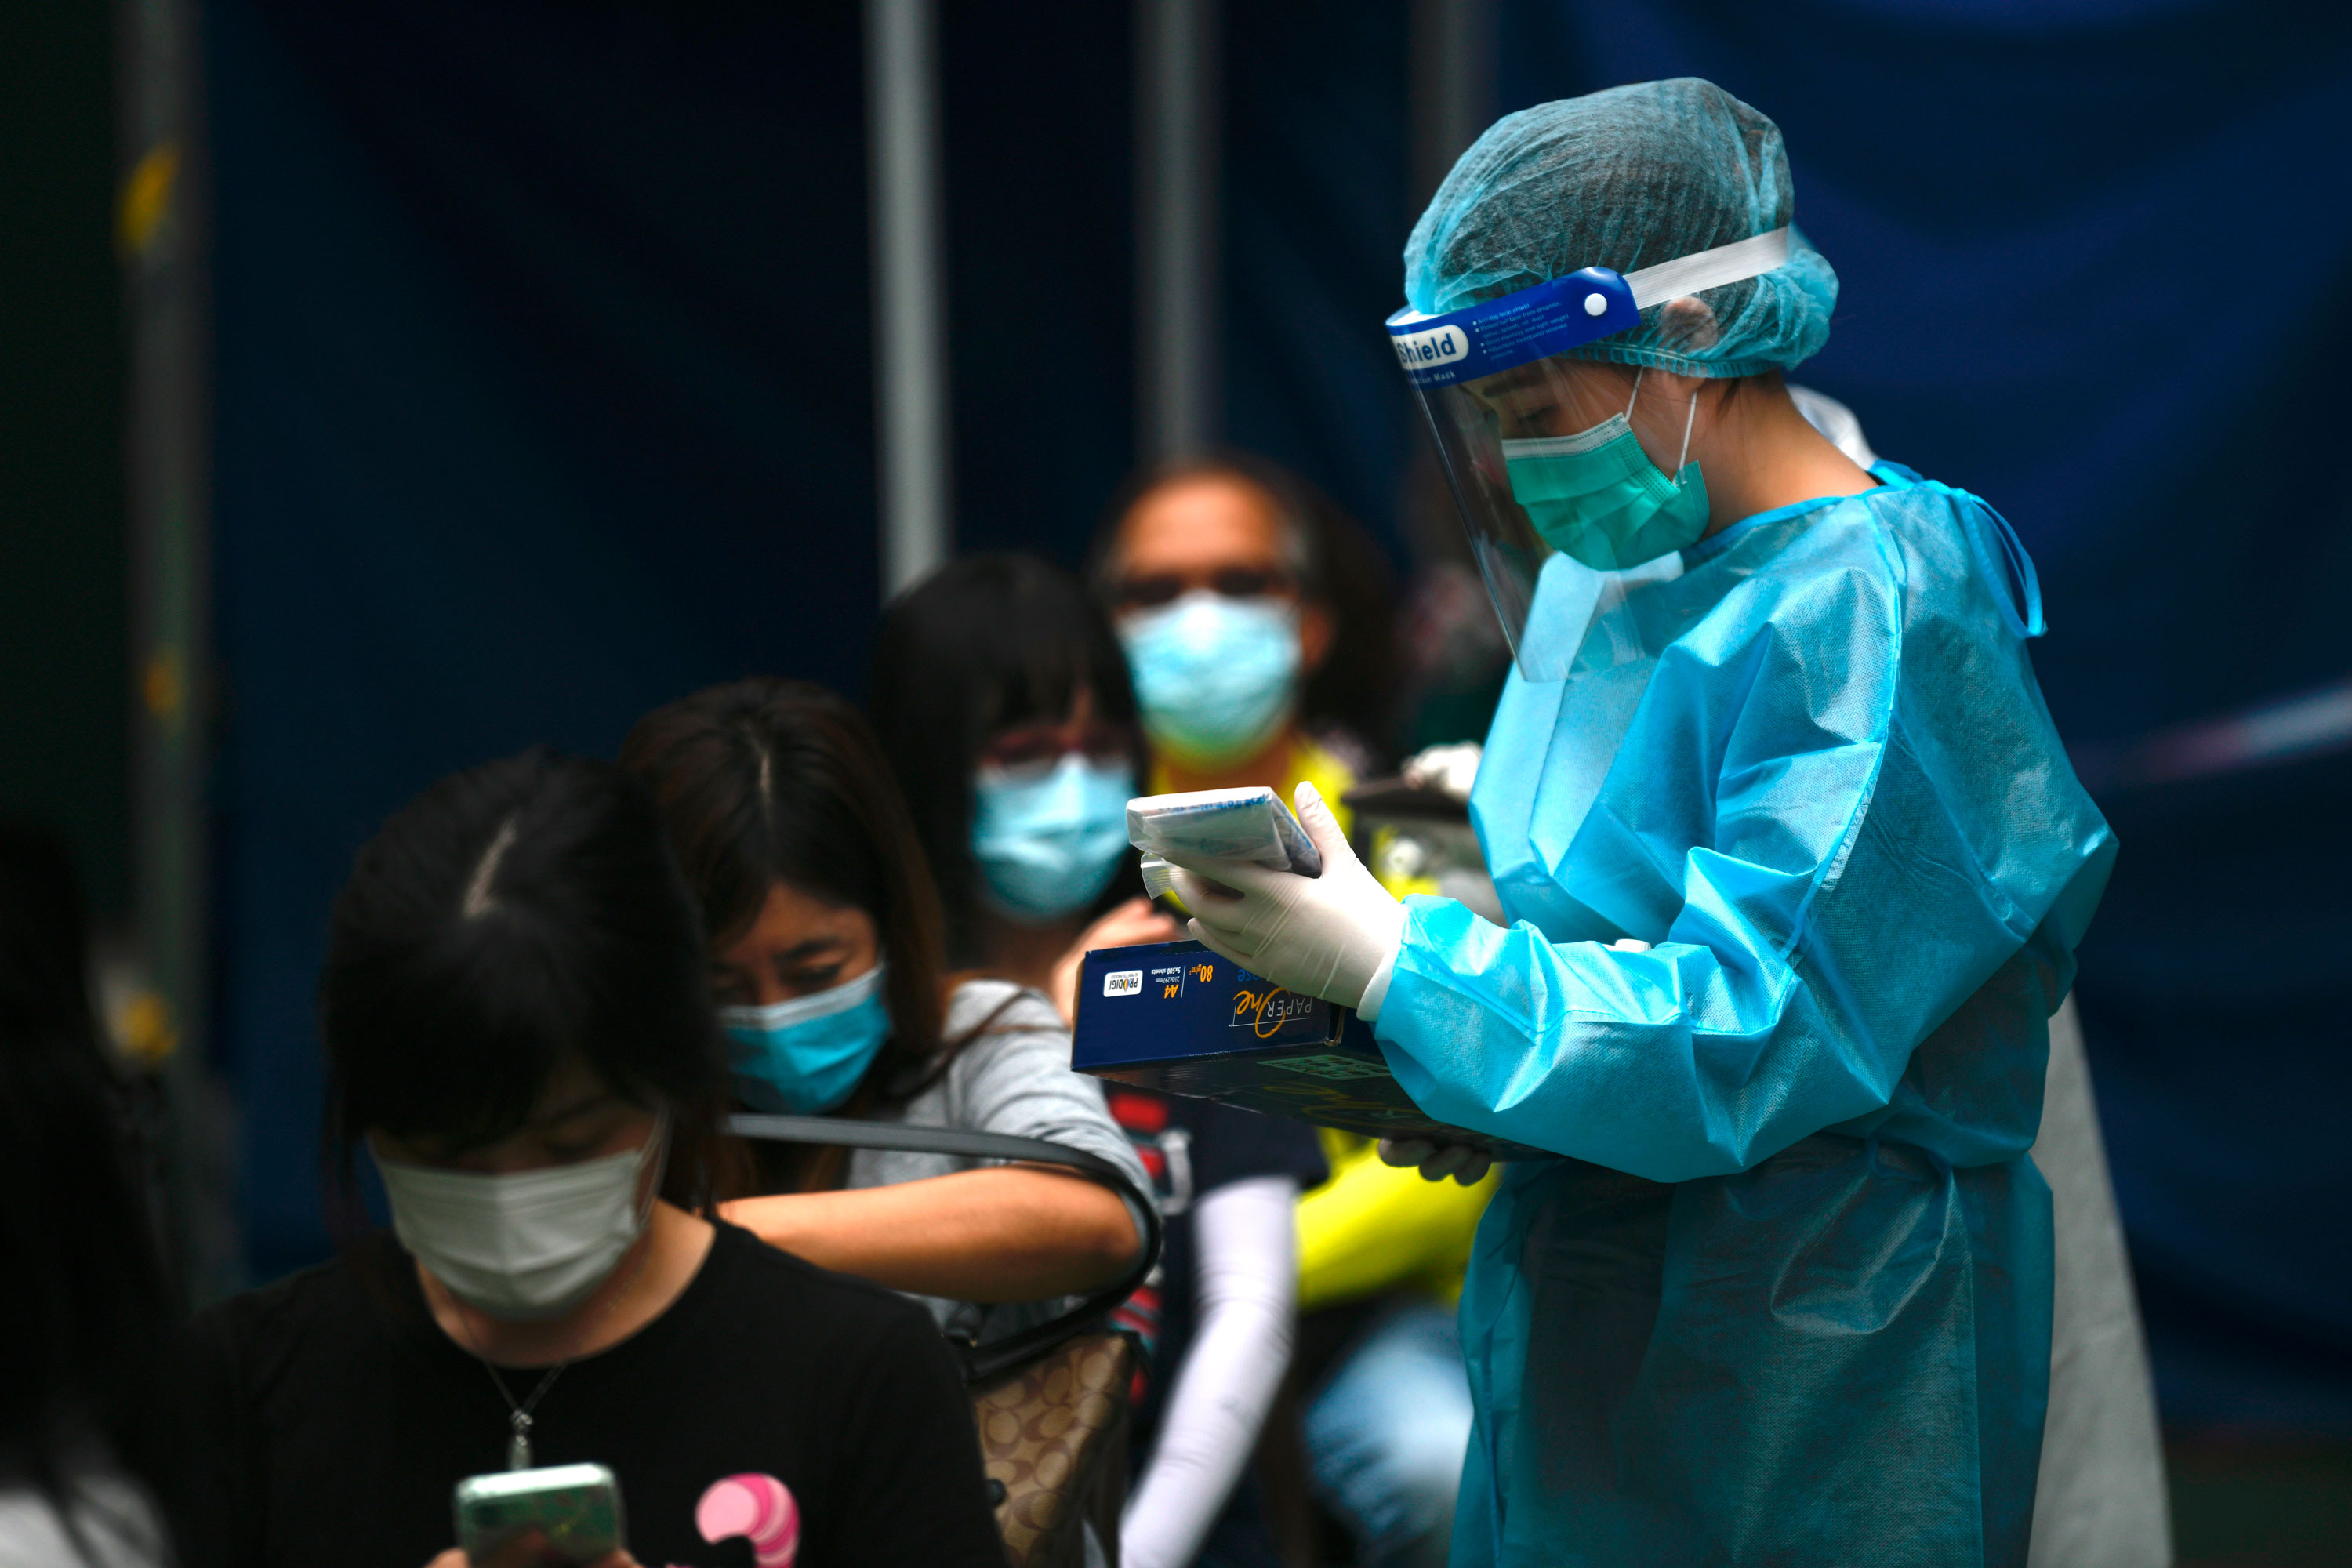 A worker in Hong Kong attends to people in line at a Covid-19 testing center on November 24.